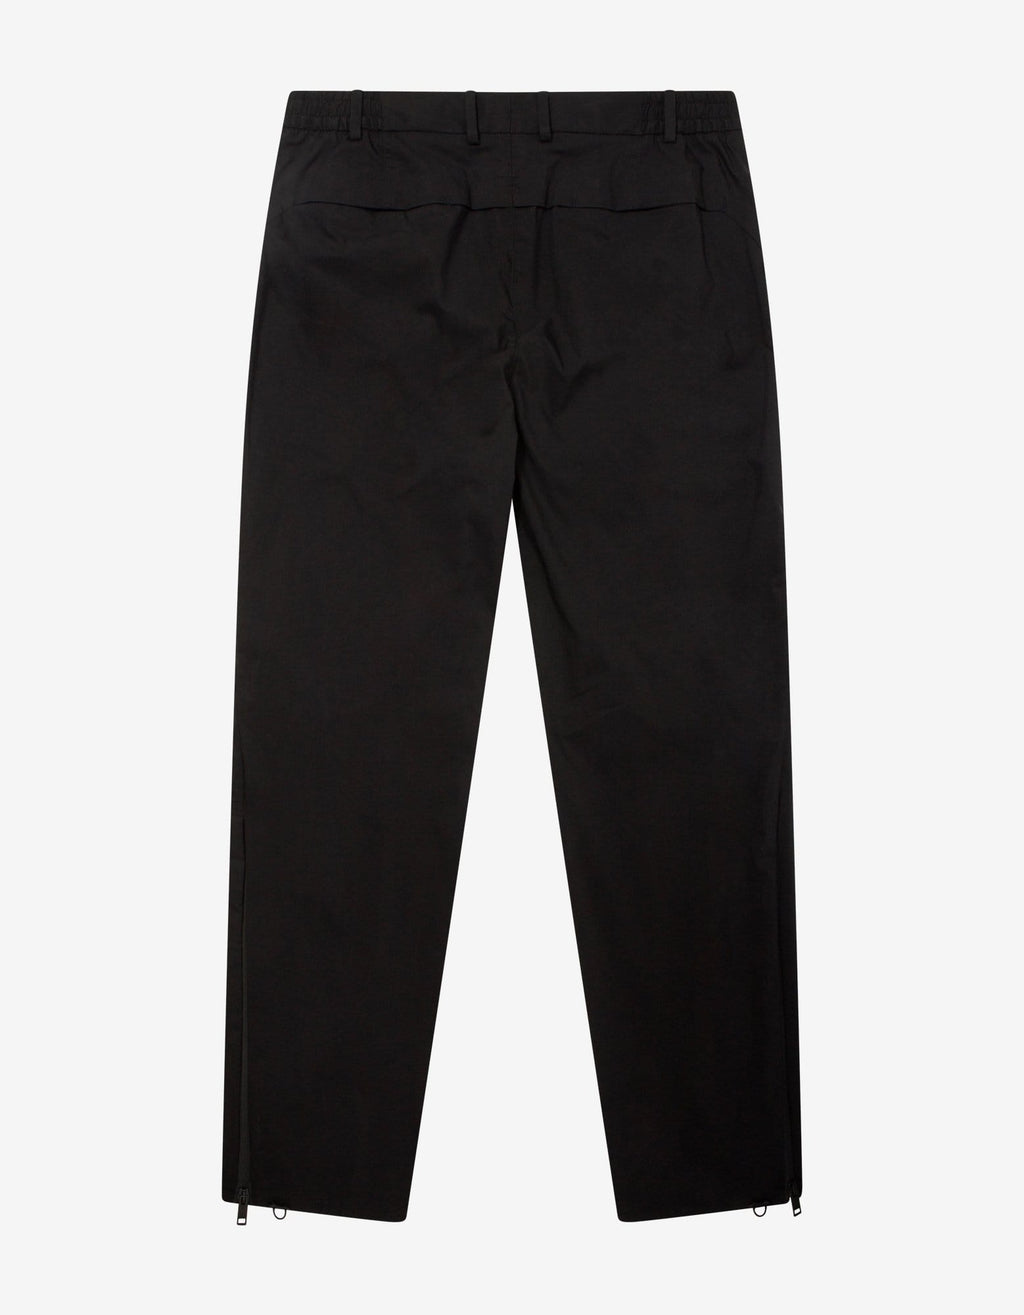 Givenchy Black Technical Trousers